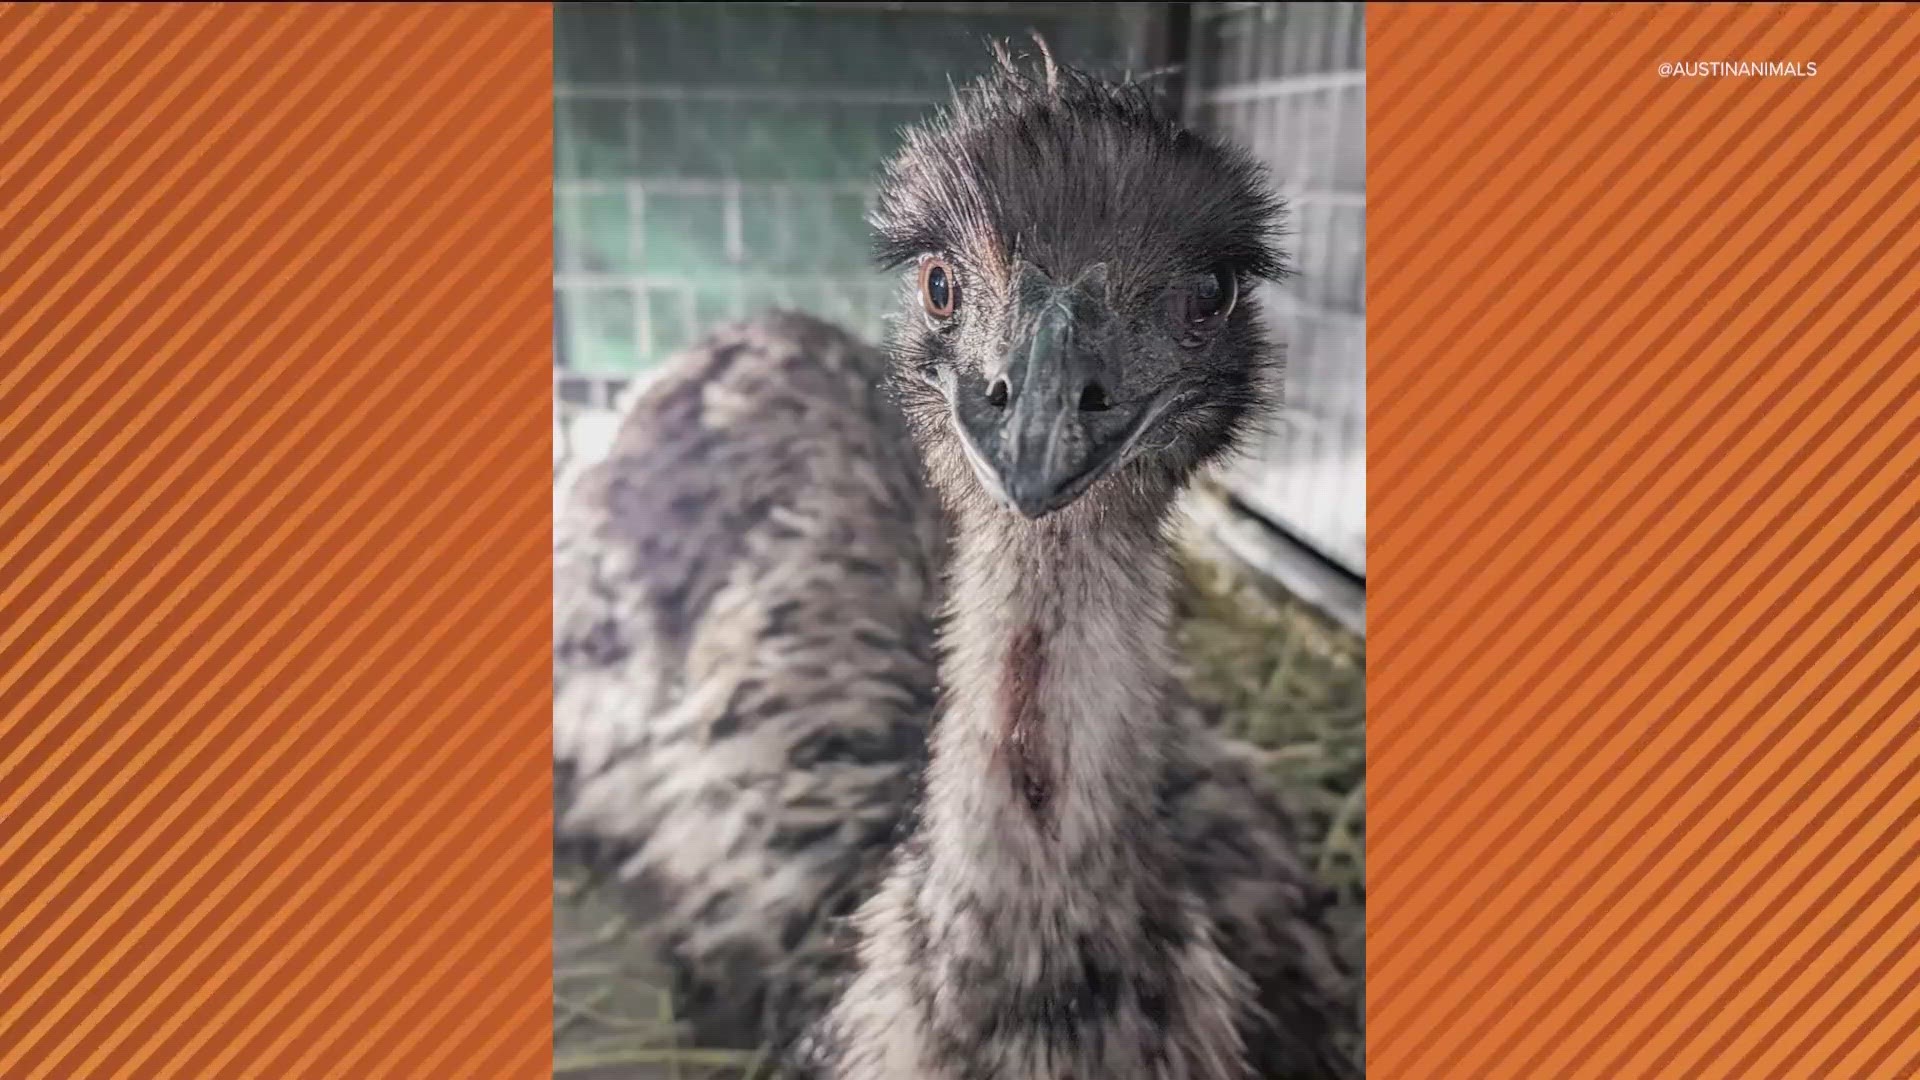 The emus have since been relocated to the Austin Zoo. The owners have not yet been found.